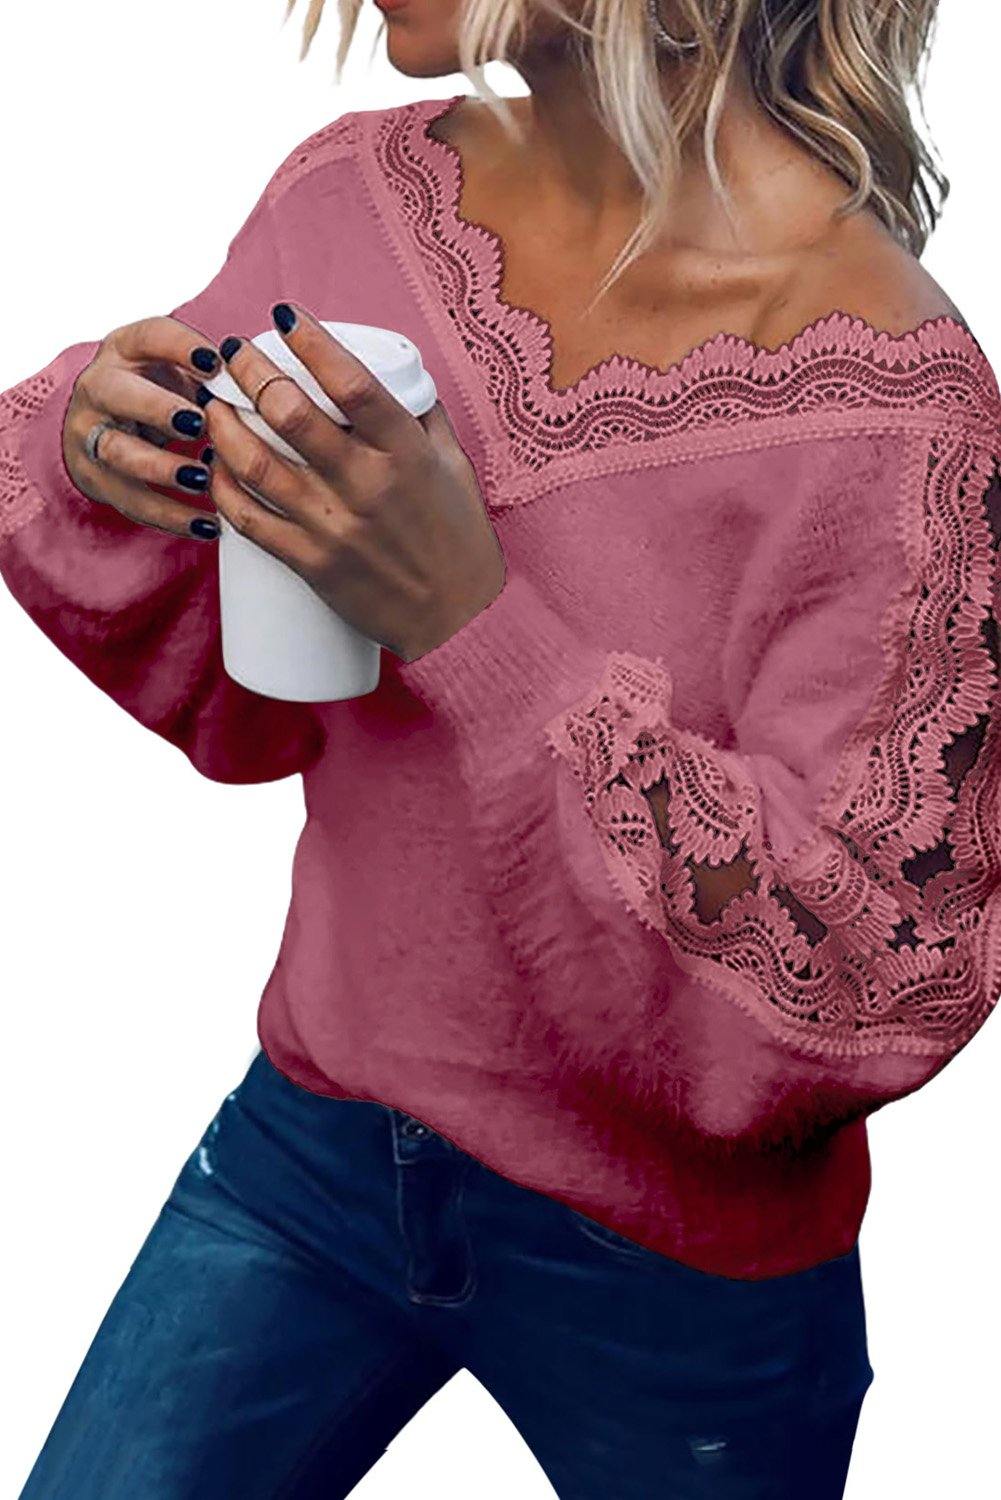 Lace Splicing V Neck Pullover Sweater - L & M Kee, LLC